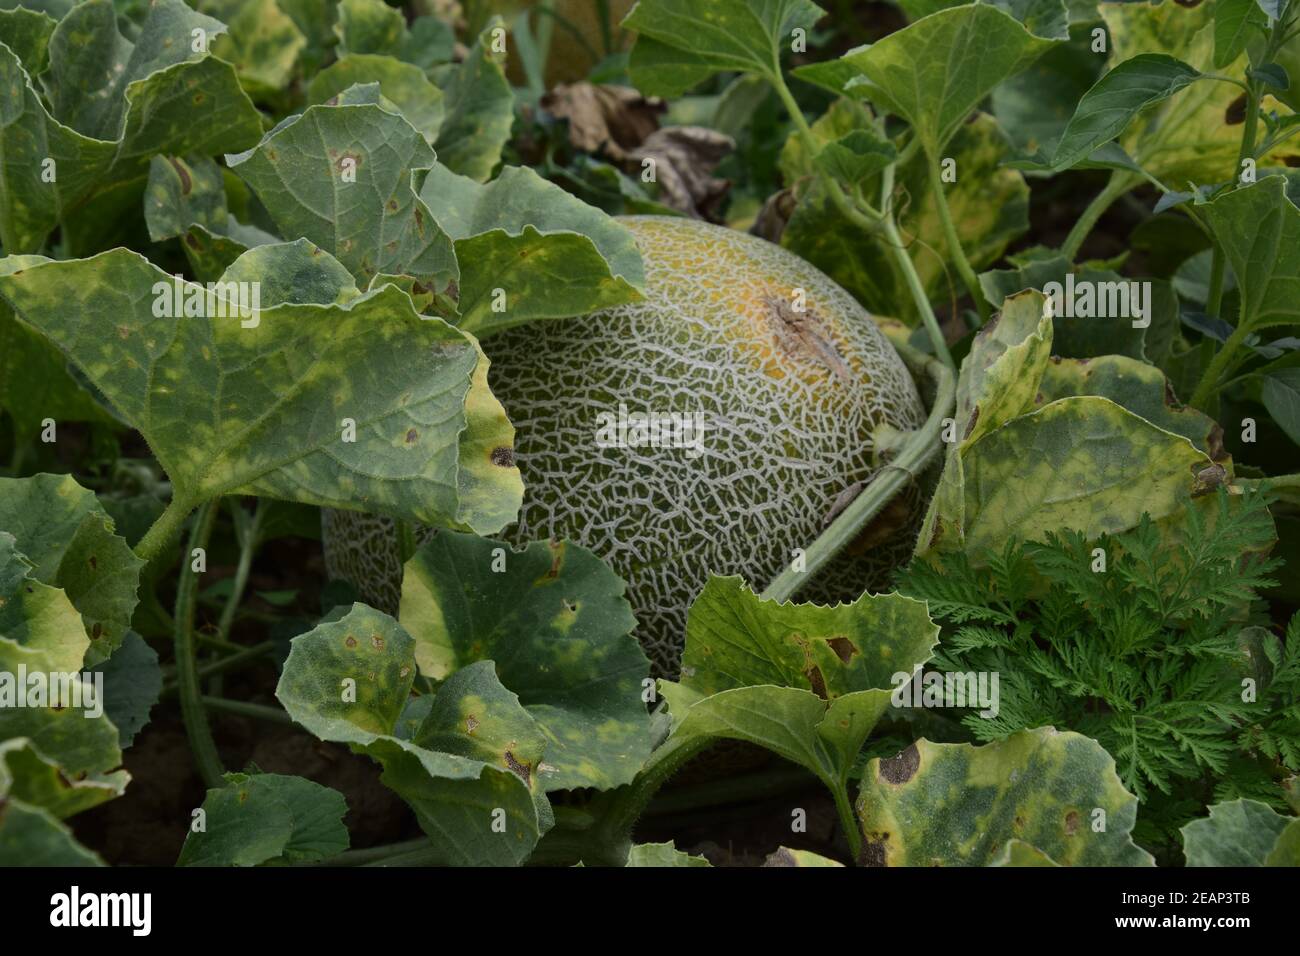 The growing melon in the field Stock Photo